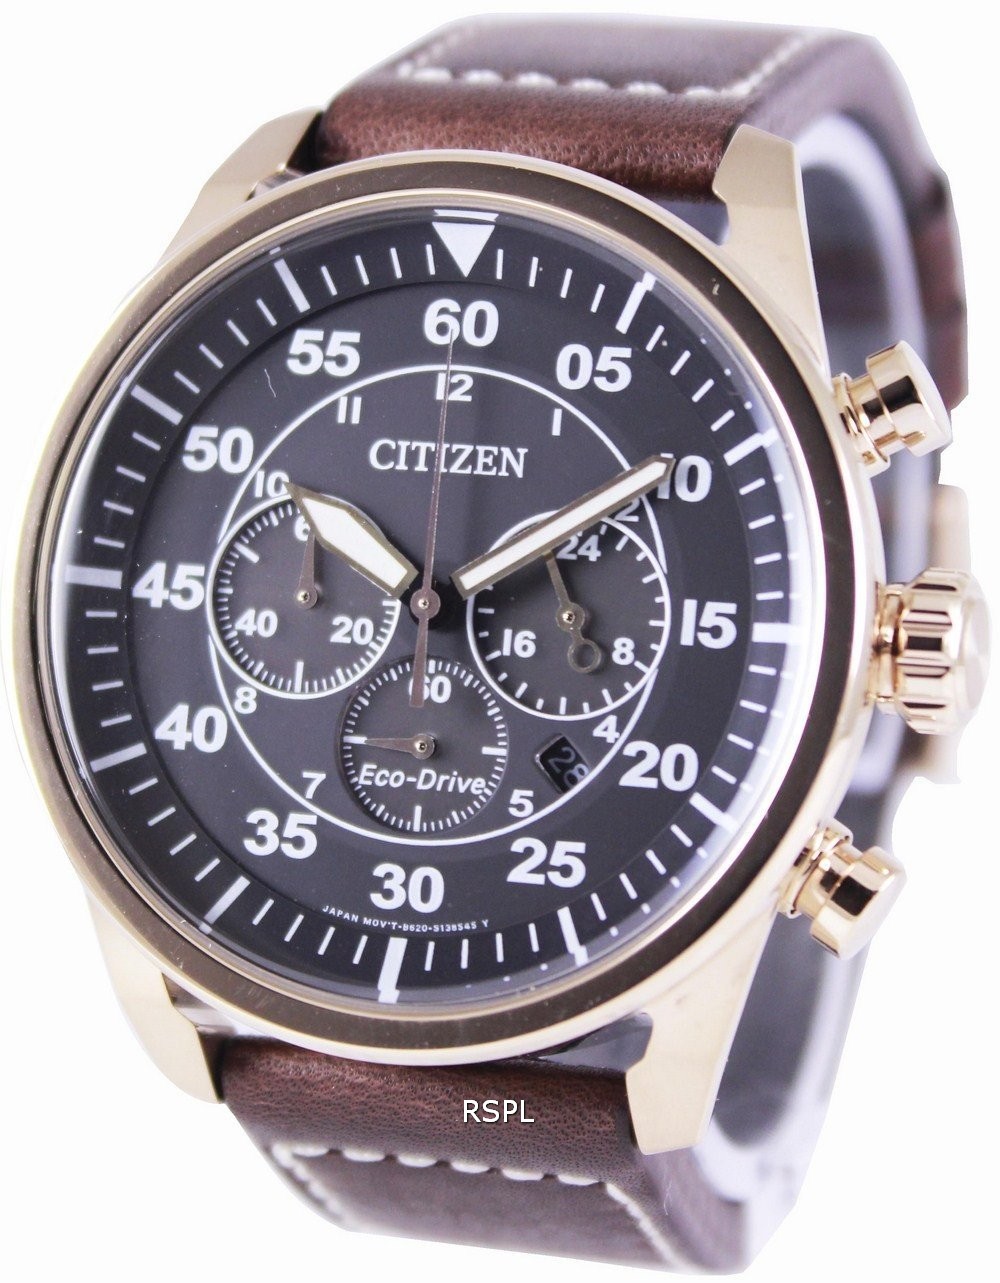 Citizen Eco-Drive Aviator Chronograph CA4213-00E Mens Watch.jpg  by creationwatches